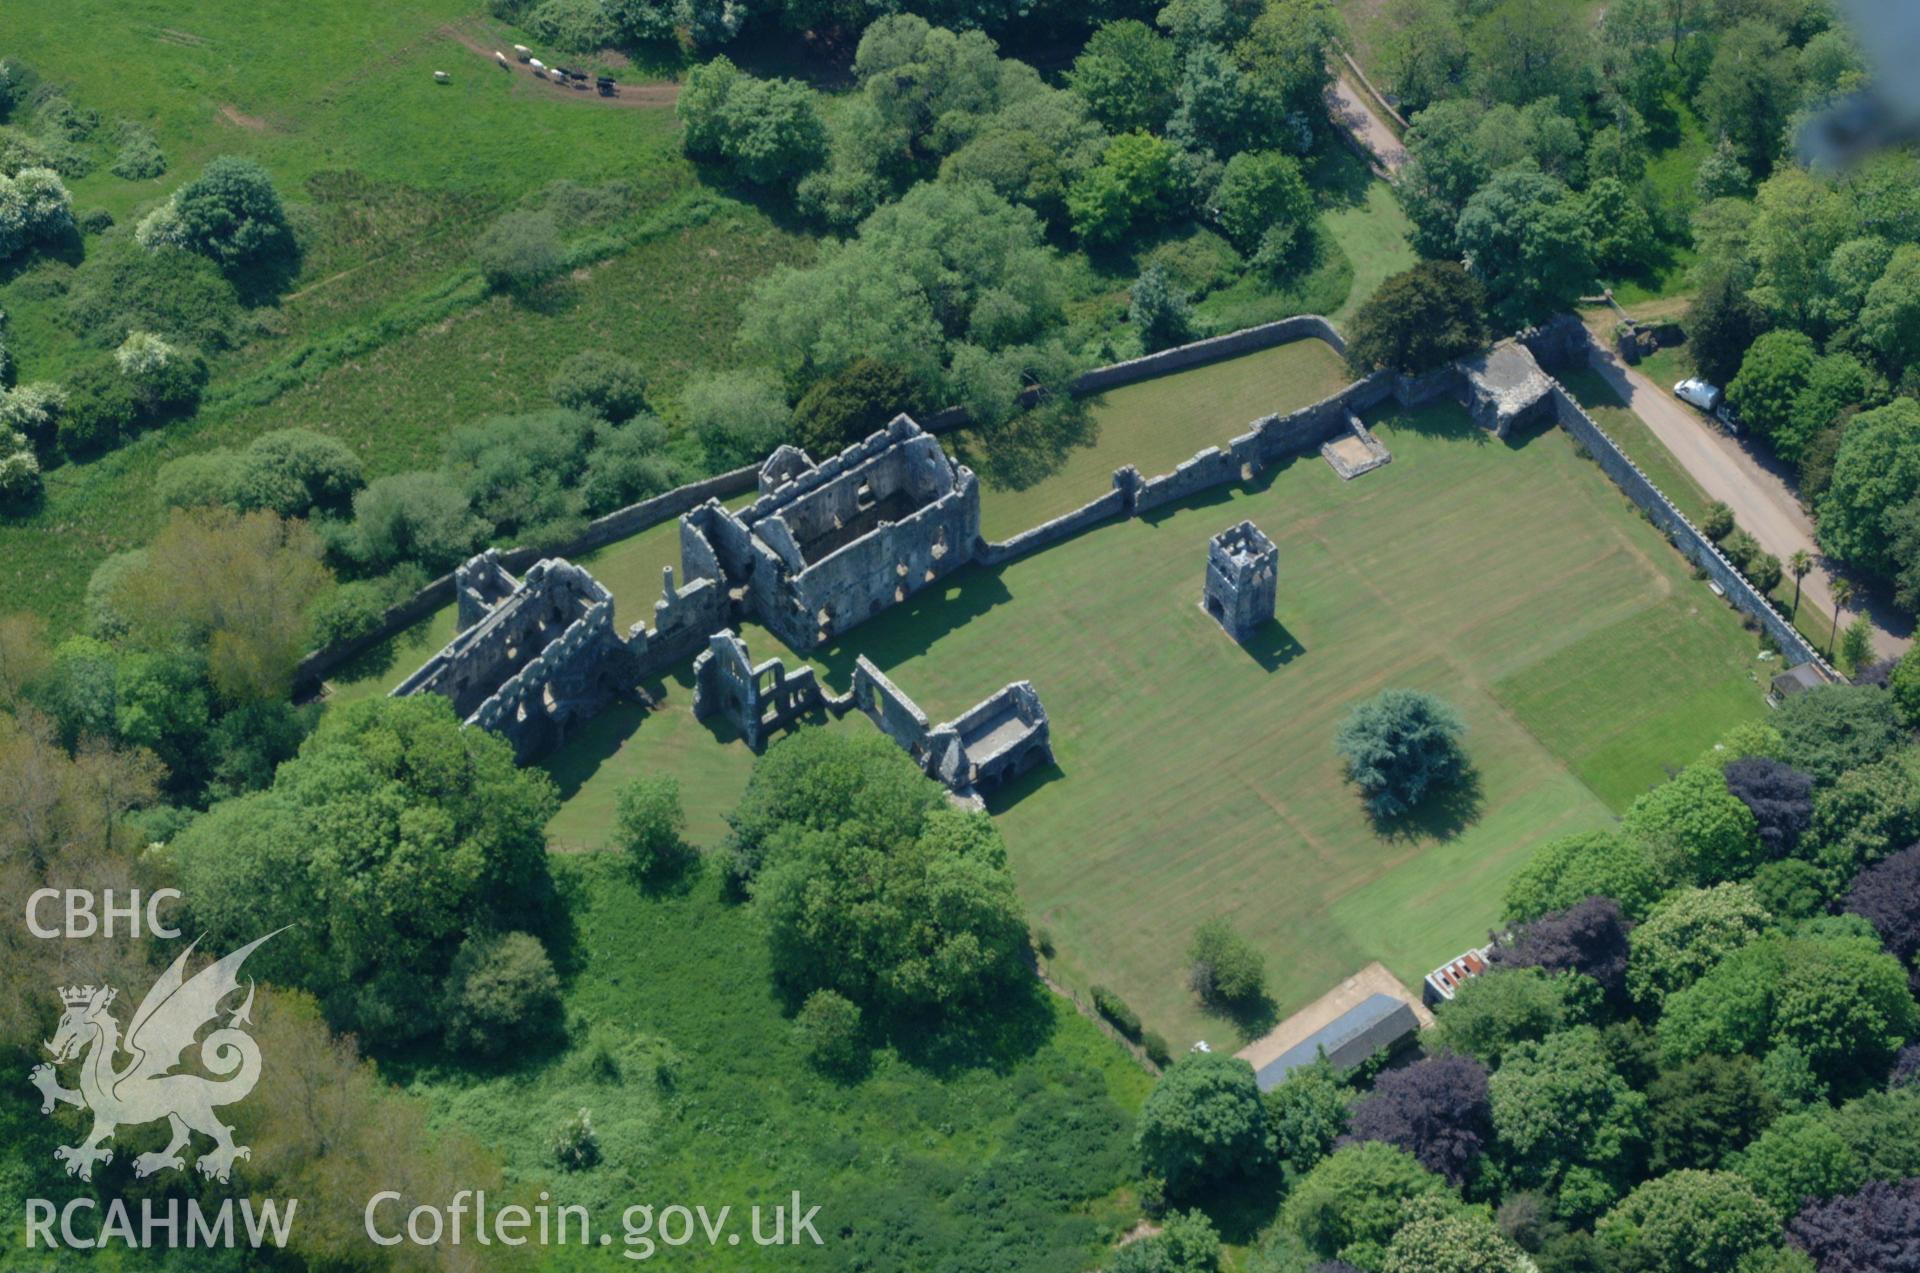 RCAHMW colour oblique aerial photograph of Lamphey Palace taken on 24/05/2004 by Toby Driver